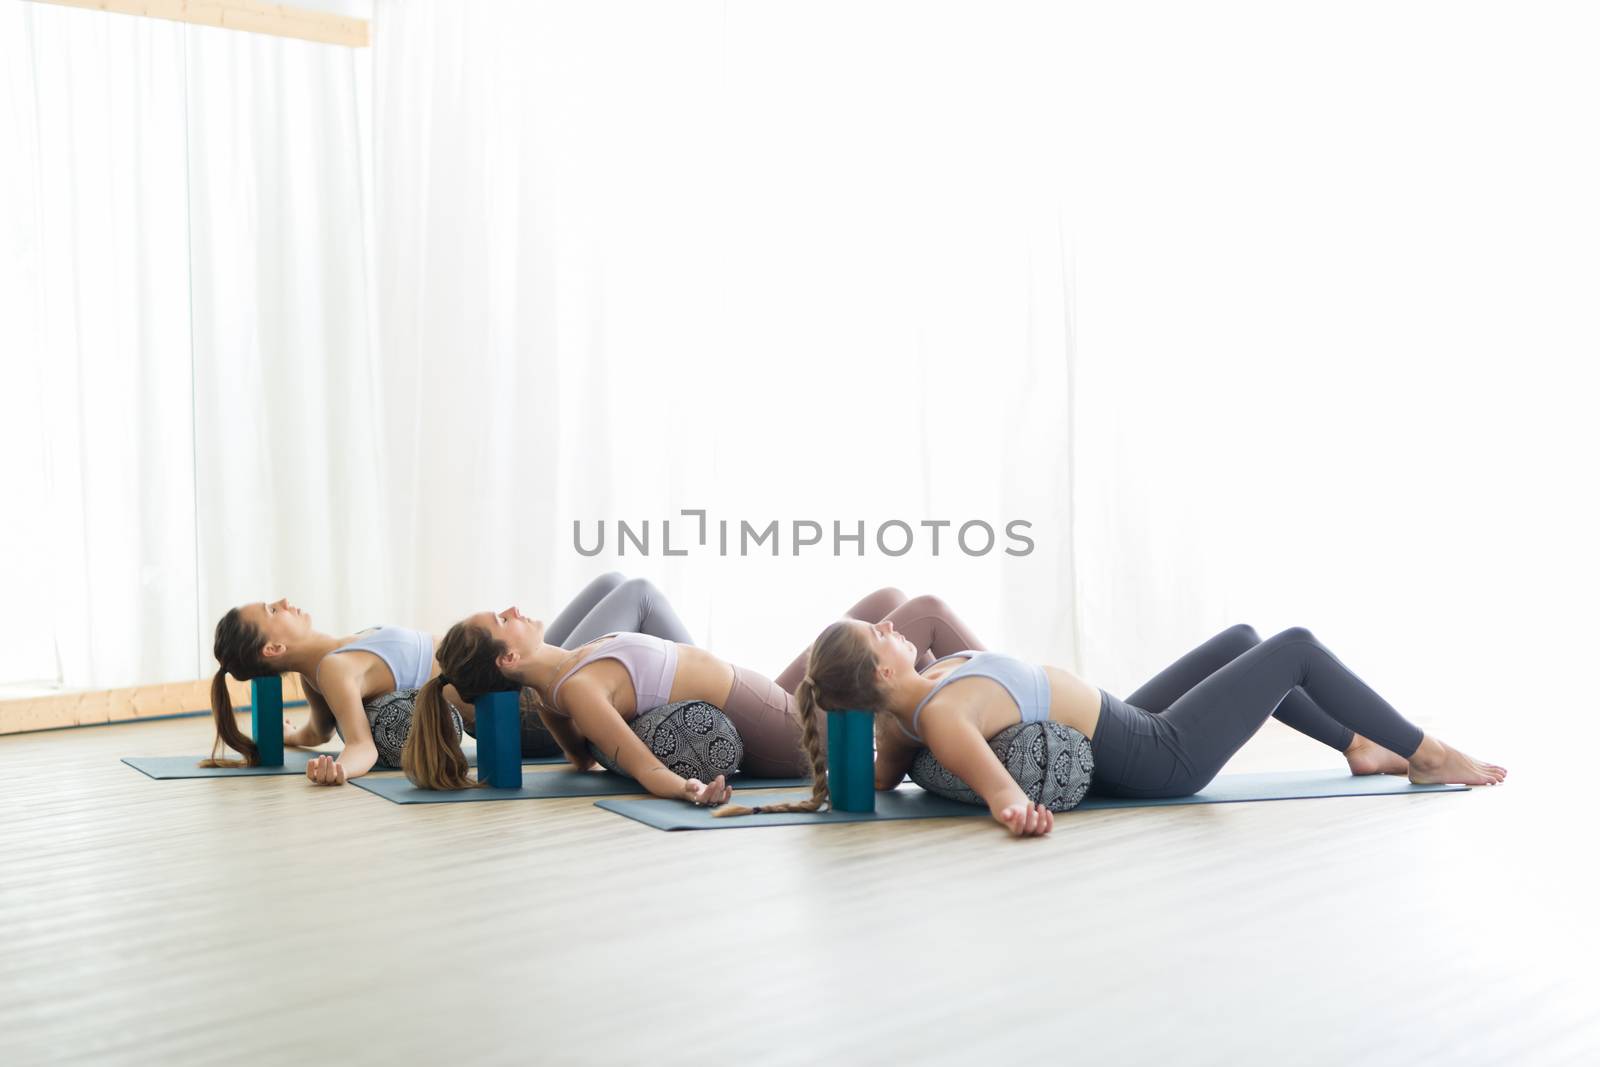 Restorative yoga with a bolster. Group of three young sporty attractive women in yoga studio, lying on bolster cushion, stretching and relaxing during restorative yoga. Healthy active lifestyle.